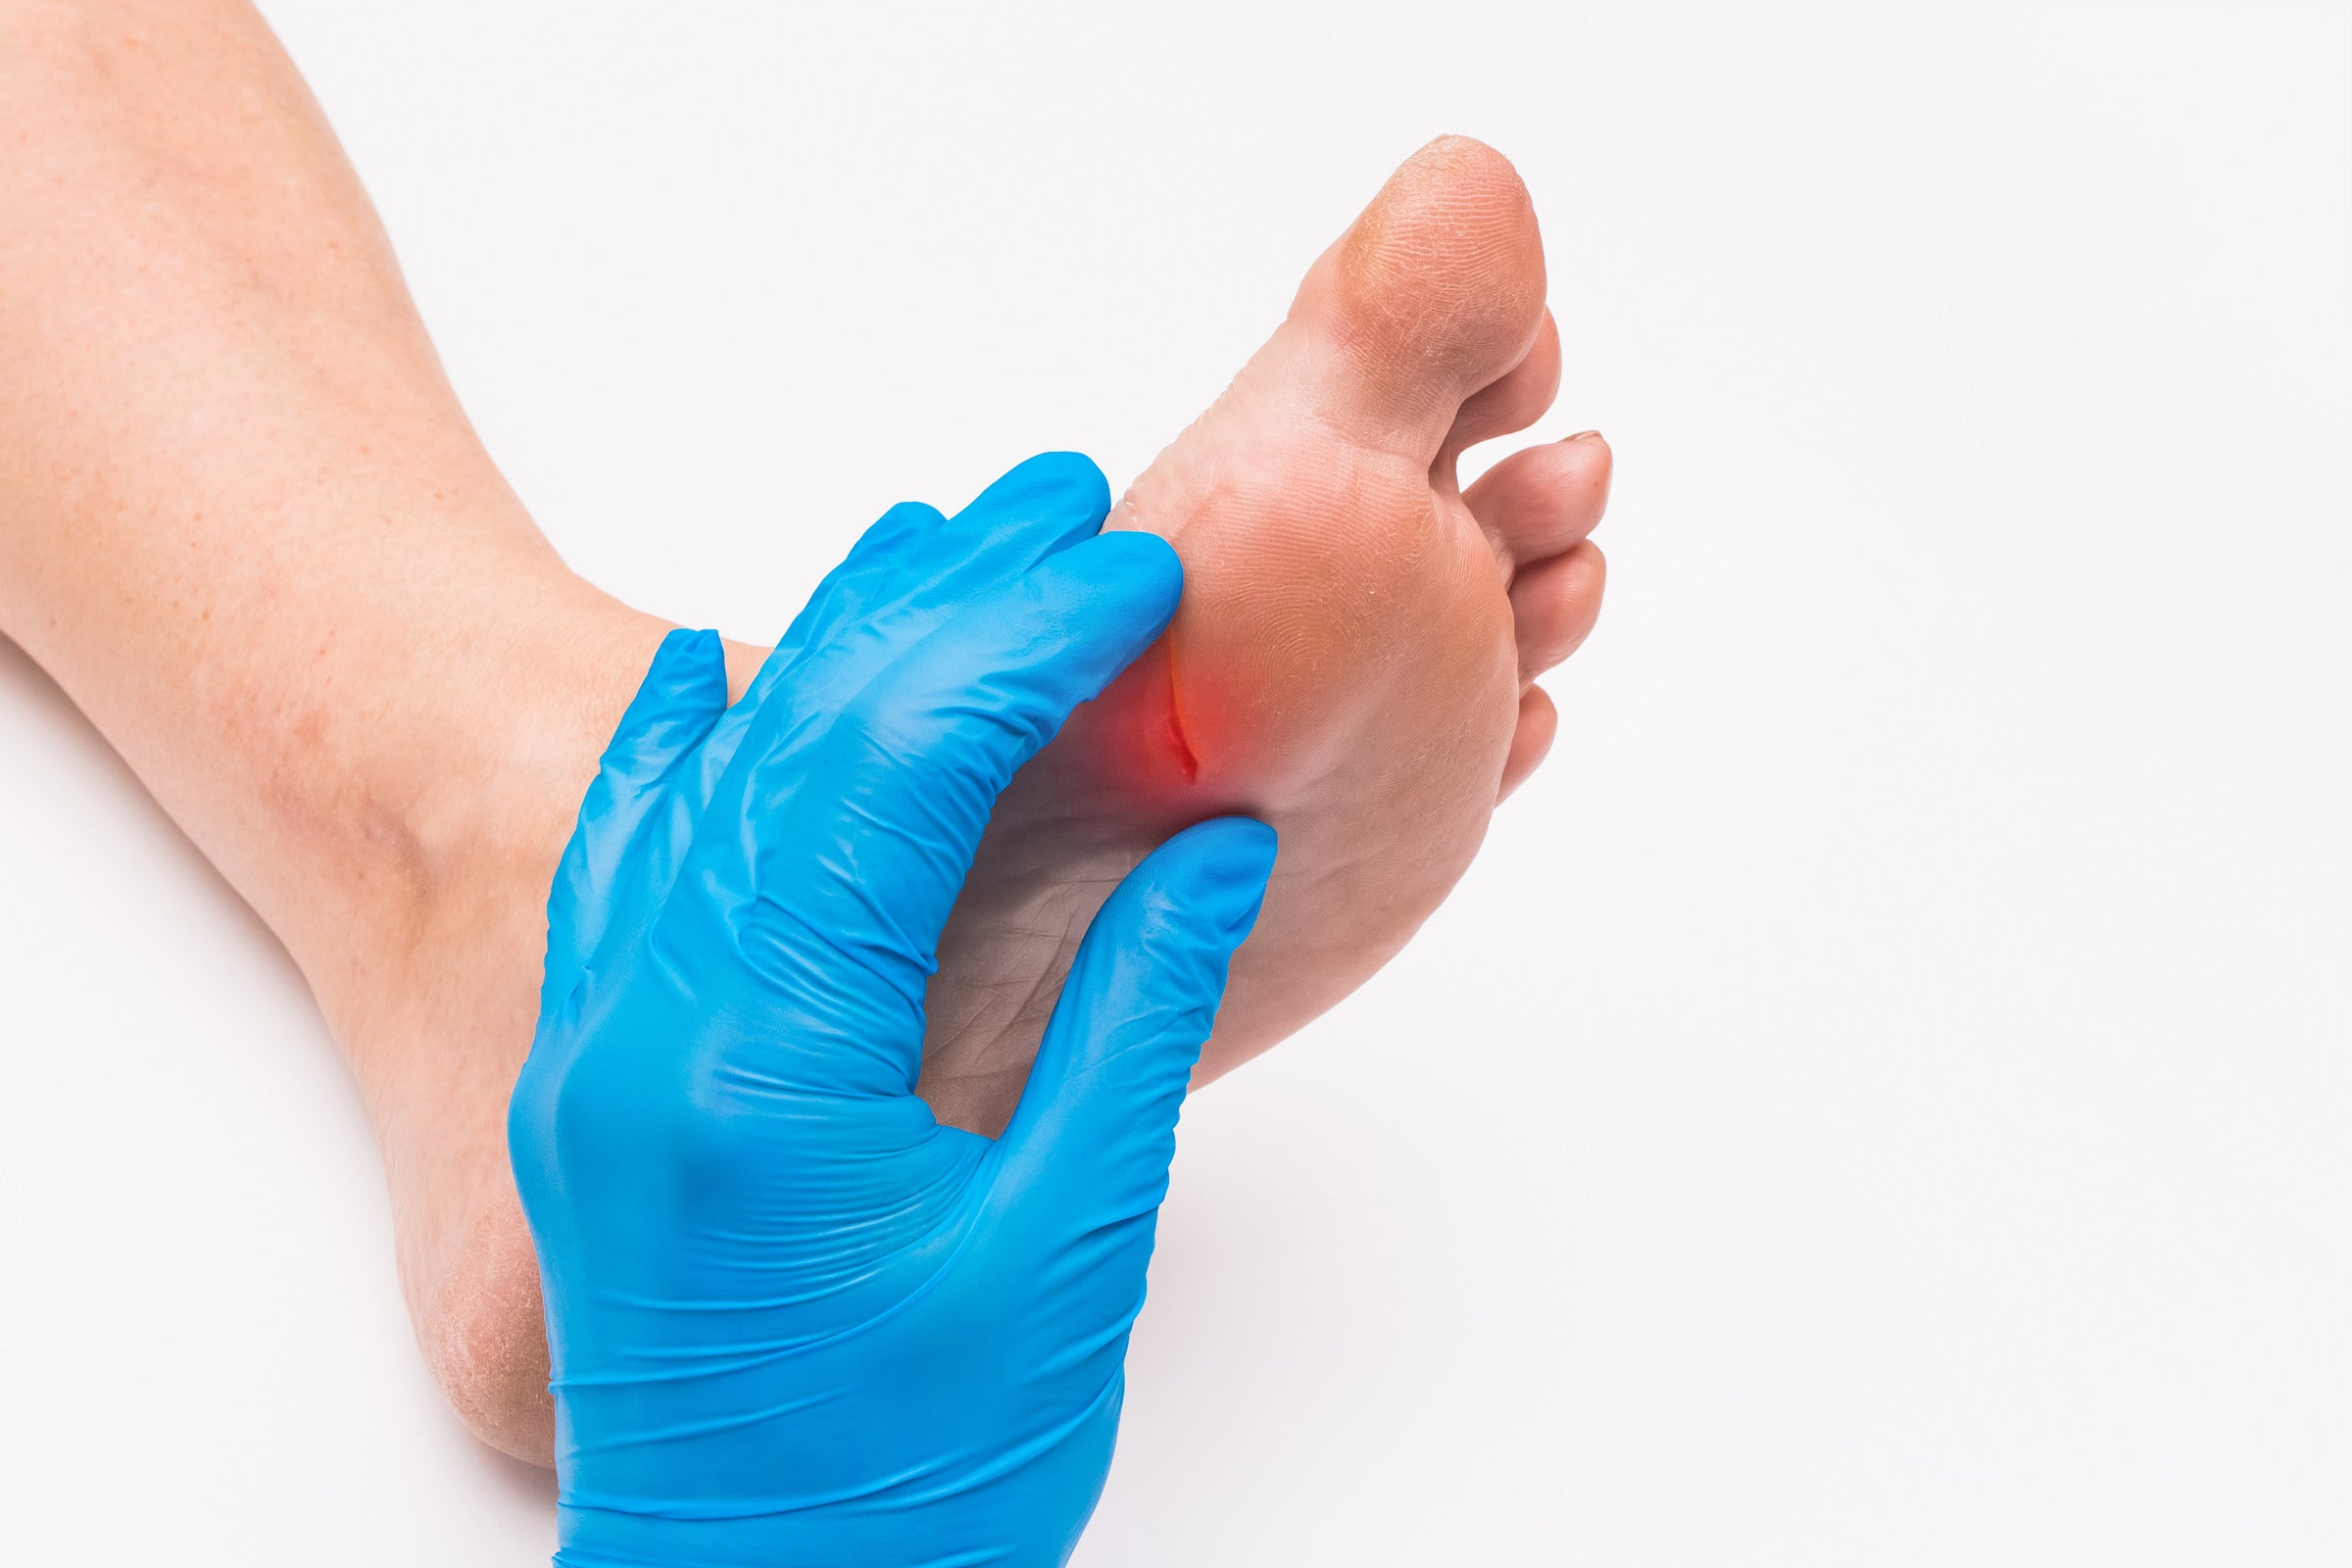 Puncture wound healing complications